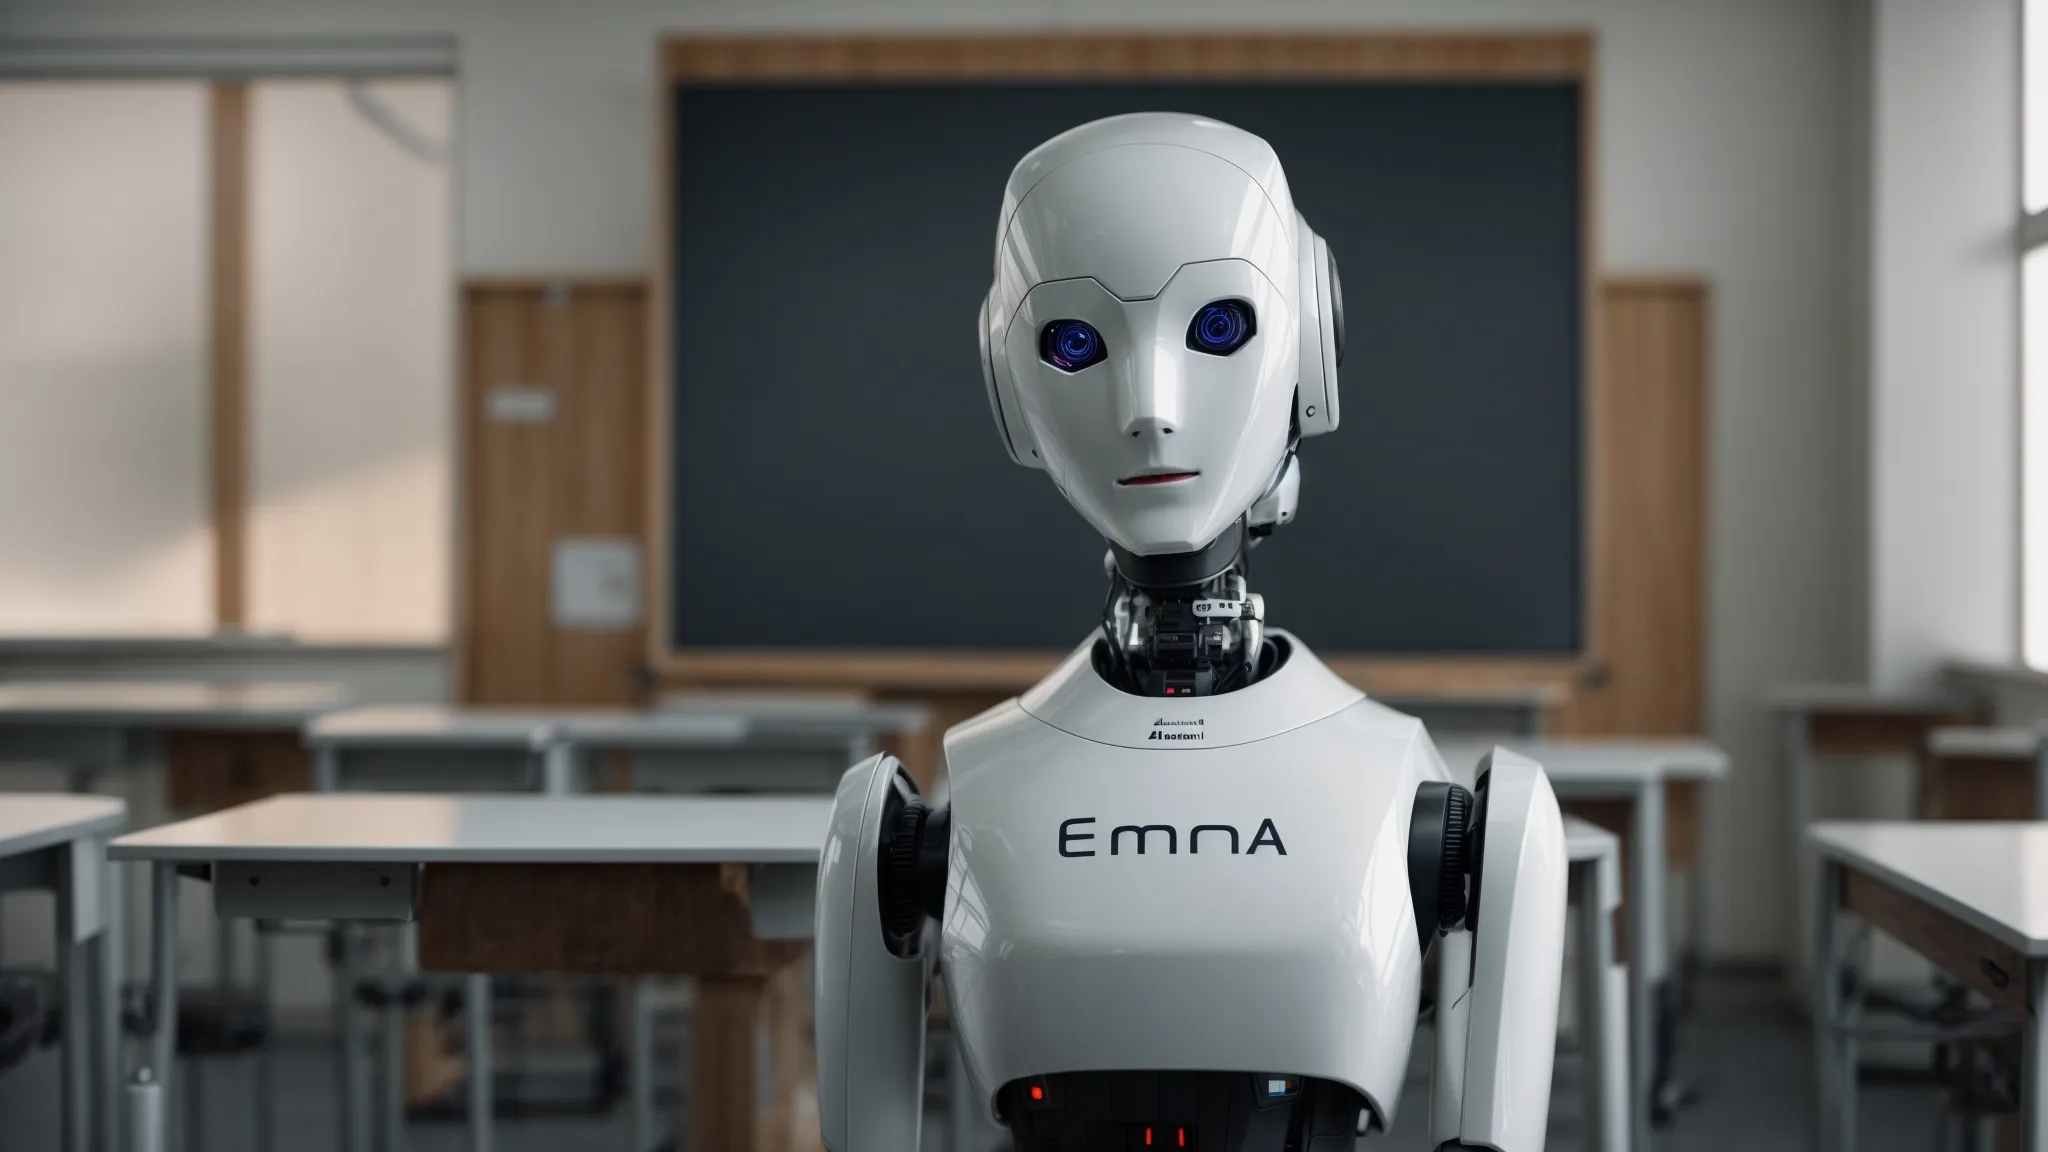 a sleek robot with a smooth, humanoid face stands beside a chalkboard labeled "emma ai" in a hi-tech classroom.